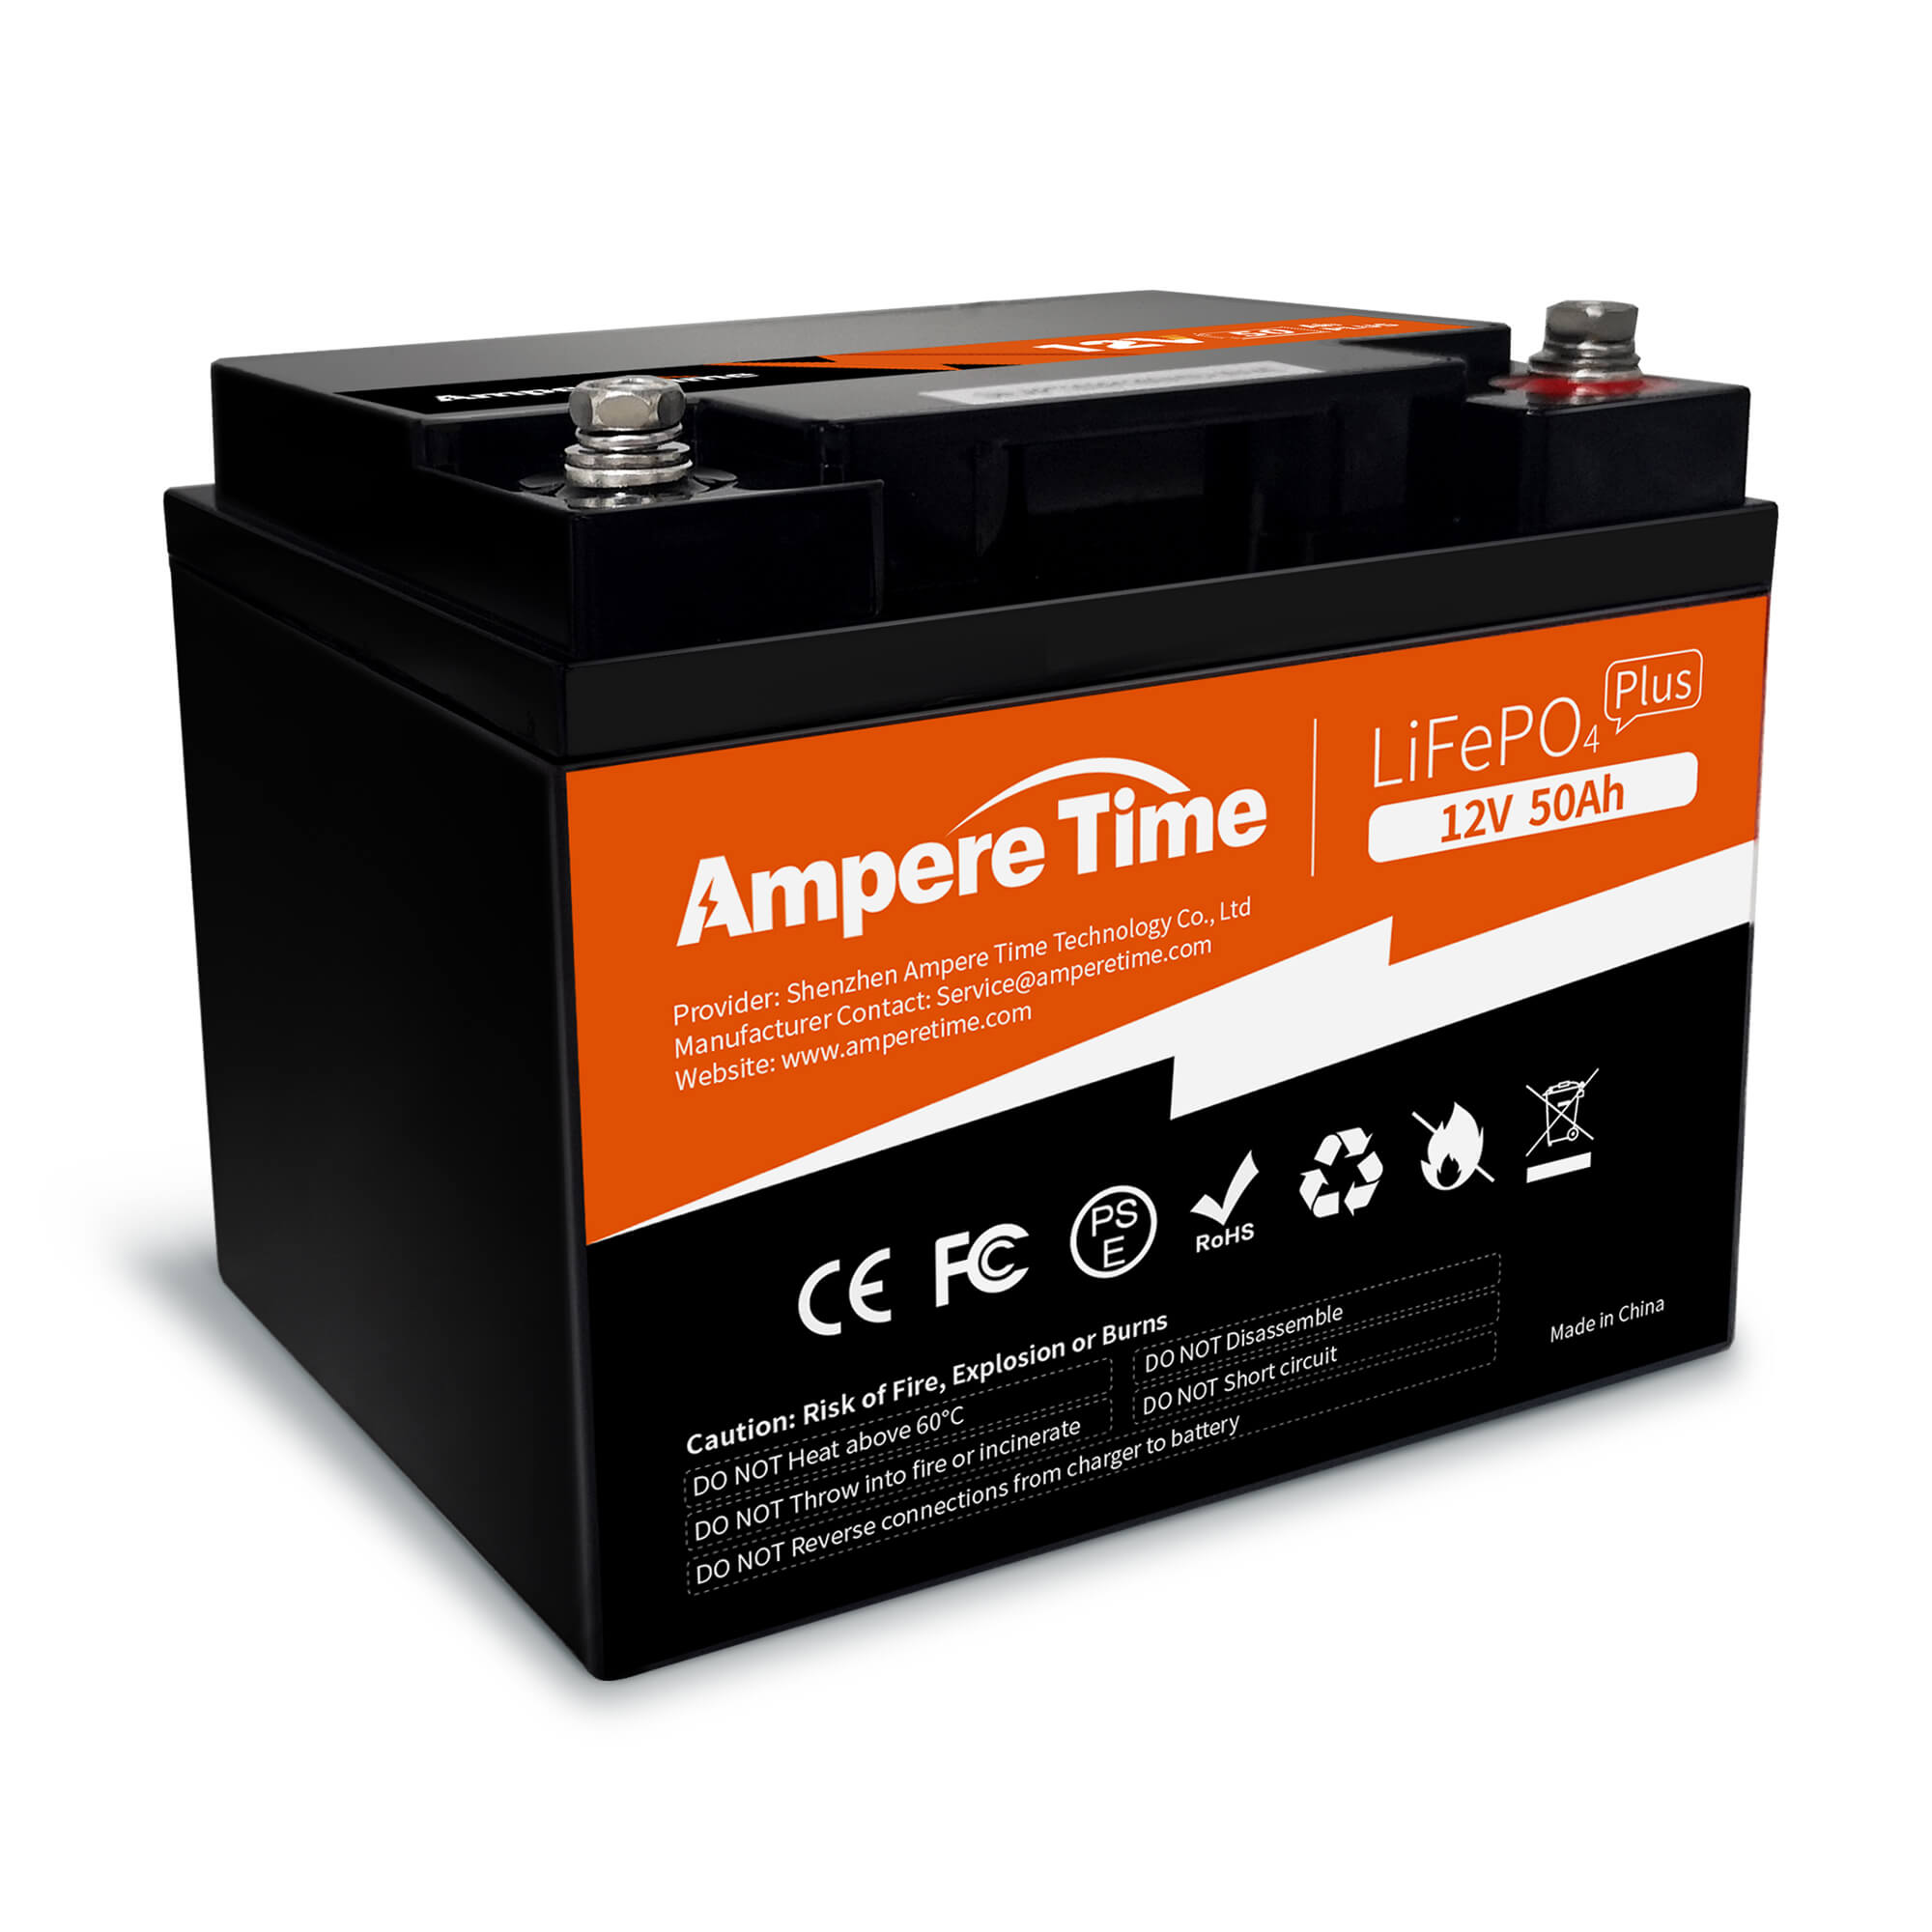 Ampere Time 12V 50Ah Lithium LiFePO4 Battery Ampere Time